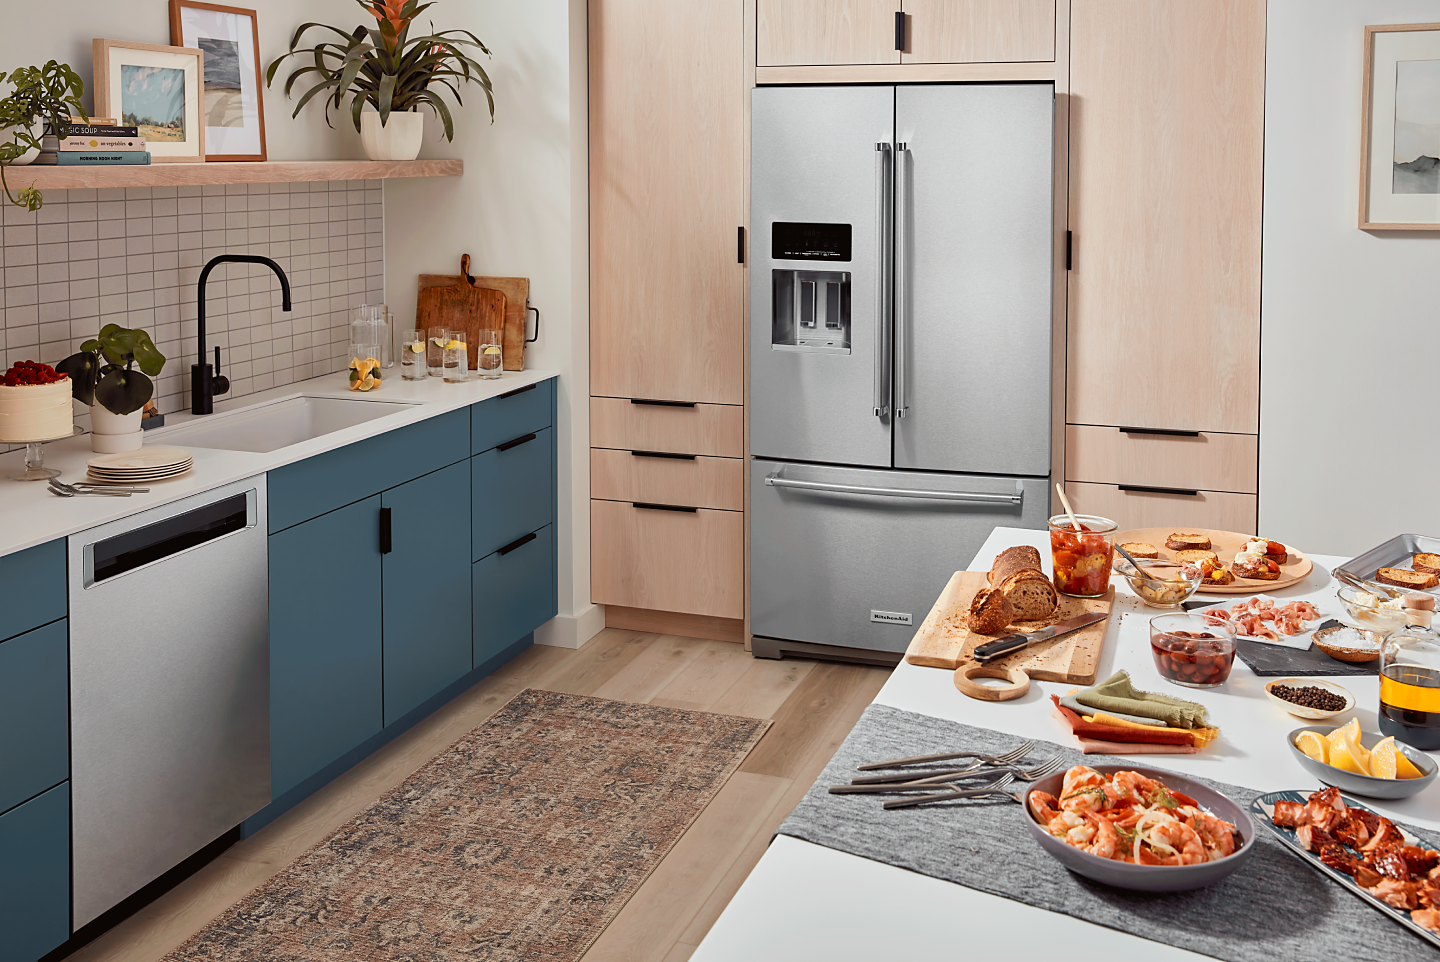 Built-in KitchenAid® French door refrigerator in light brown cabinetry 